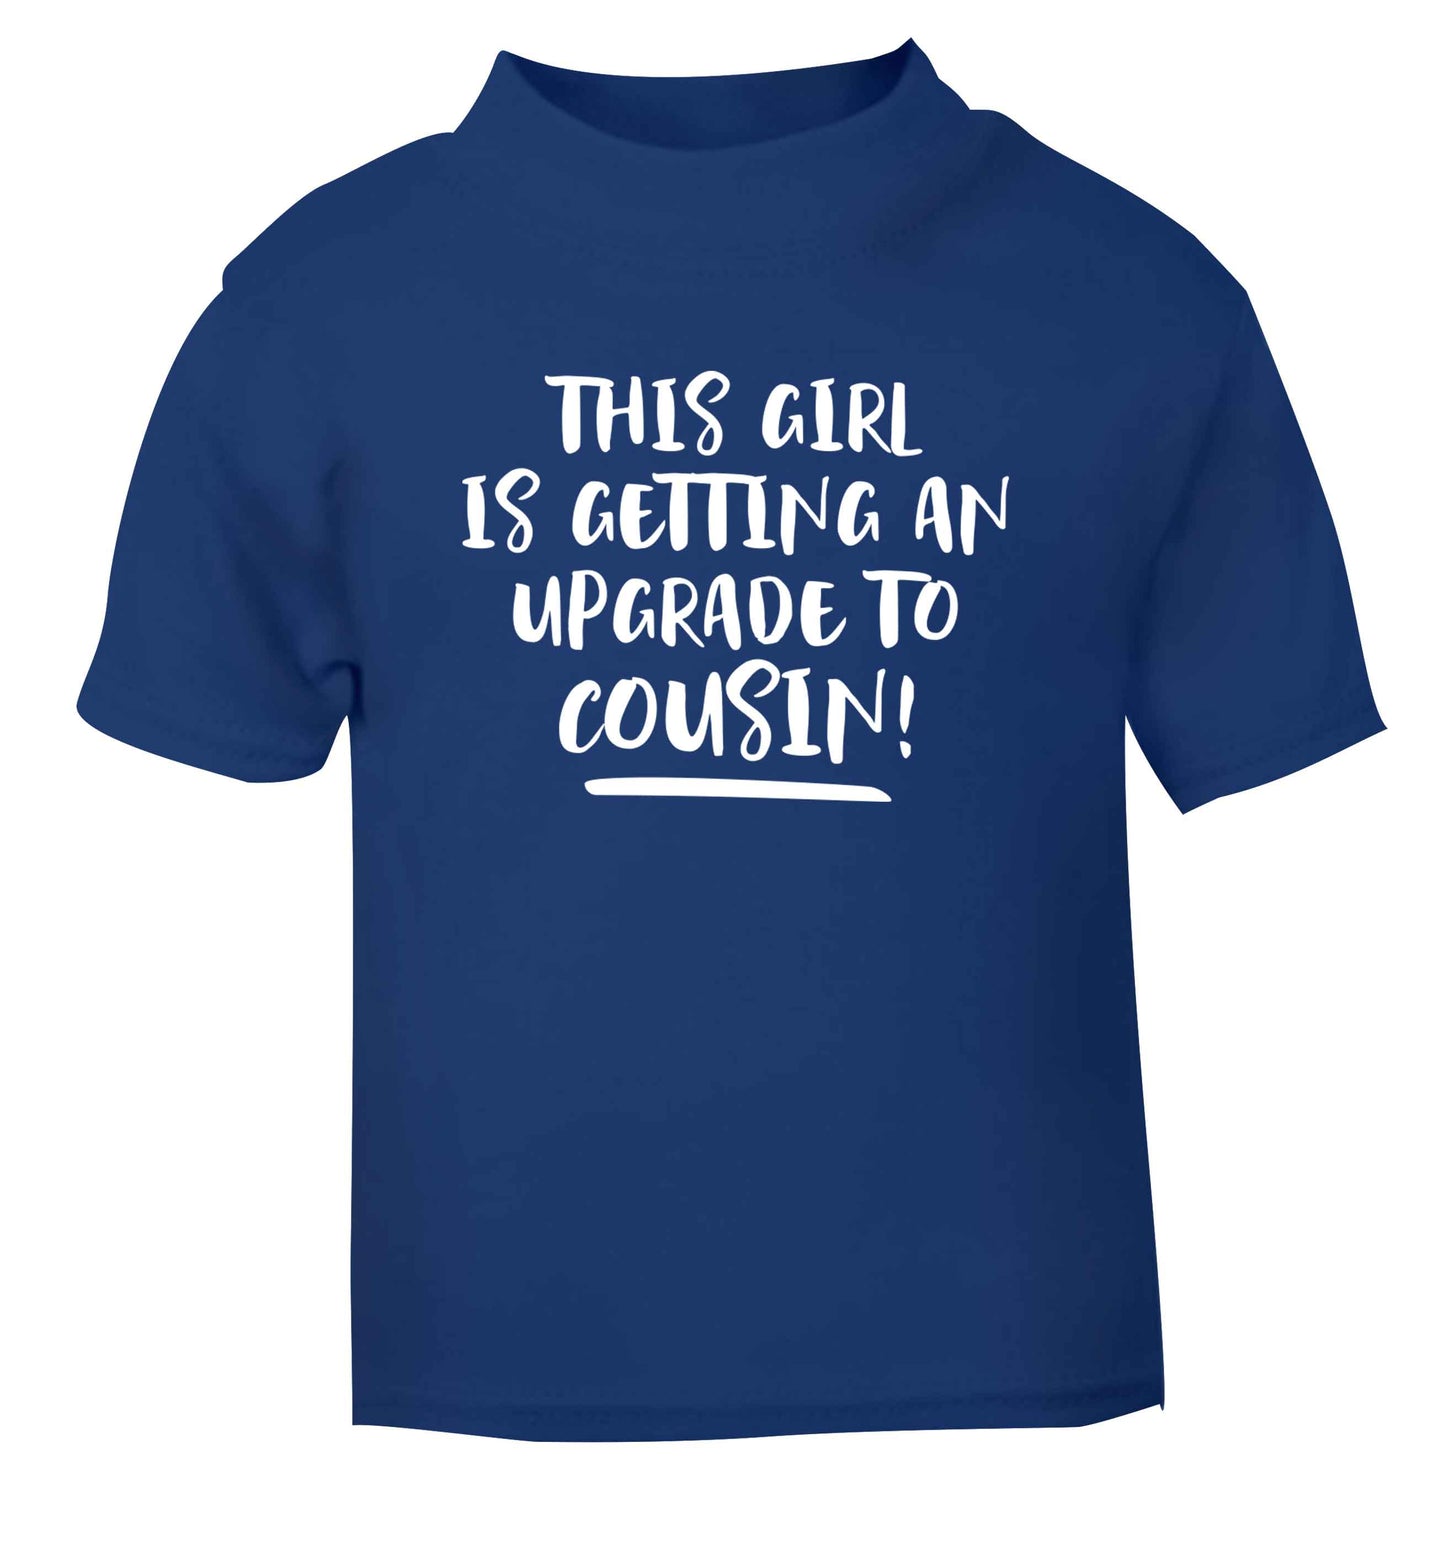 This girl is getting an upgrade to cousin! blue Baby Toddler Tshirt 2 Years